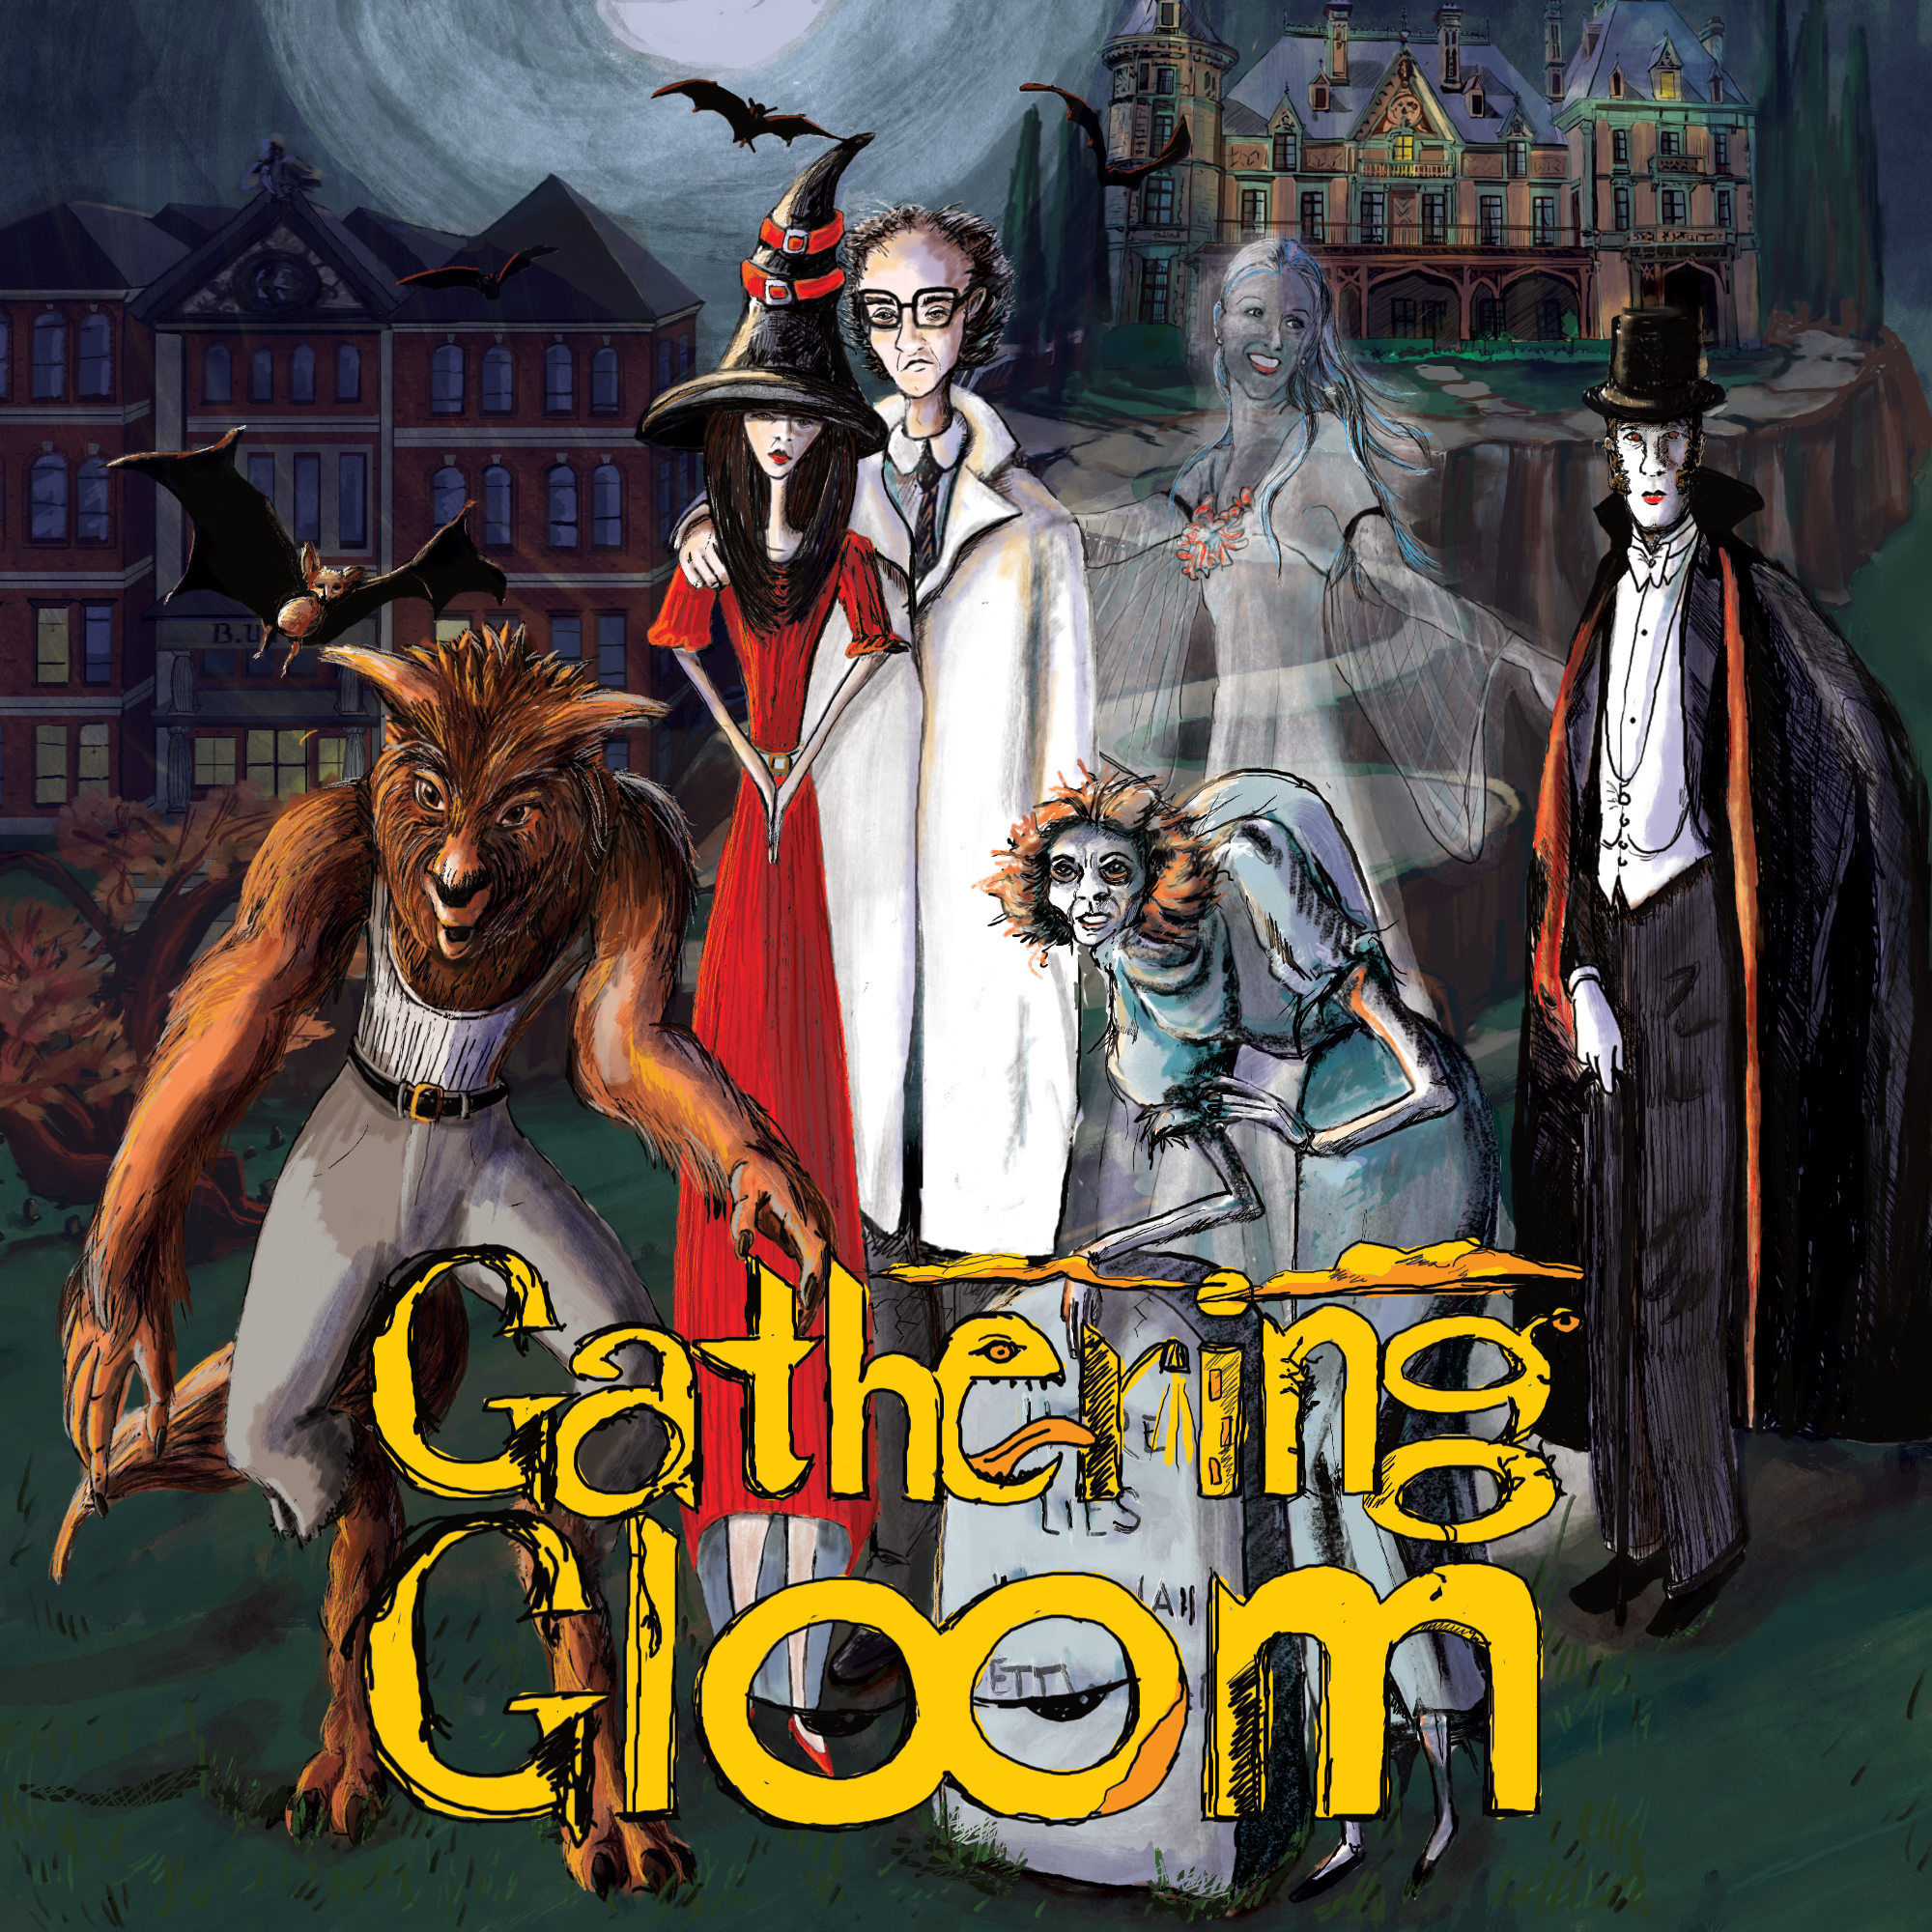 Gathering Gloom - with type